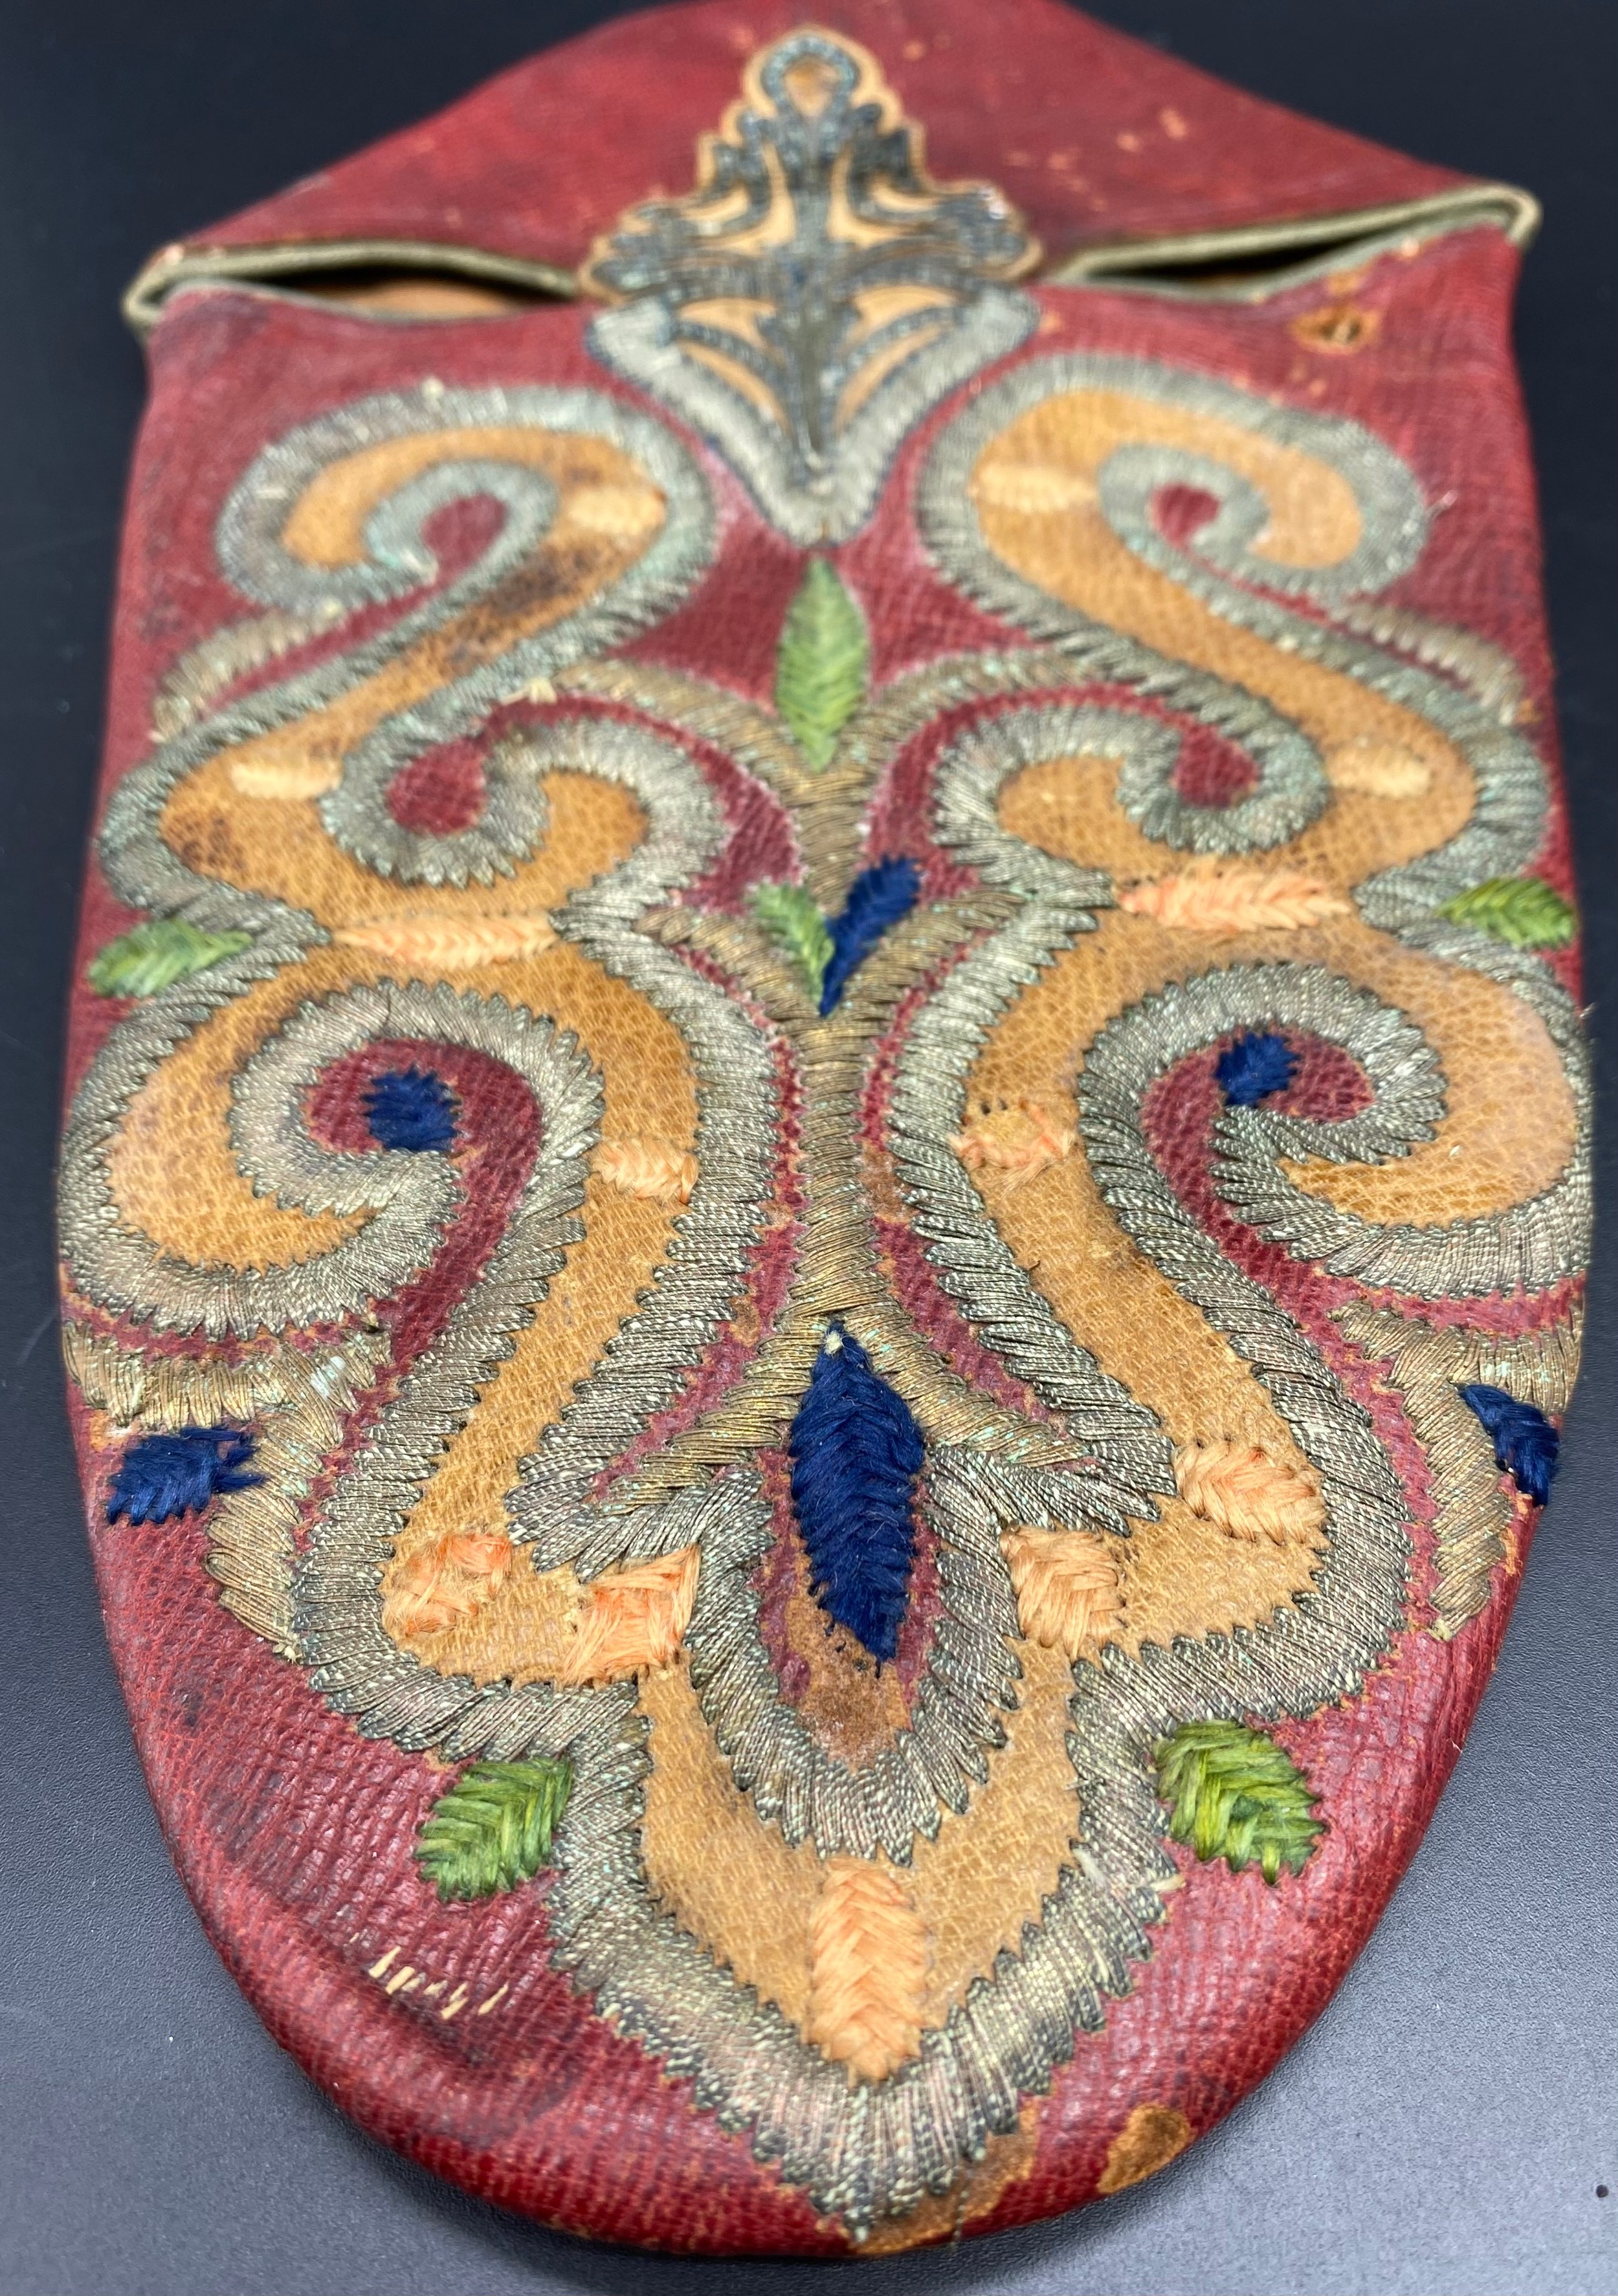 A pair of 19th century Turkish or Ottoman embroidered slippers - Image 3 of 5